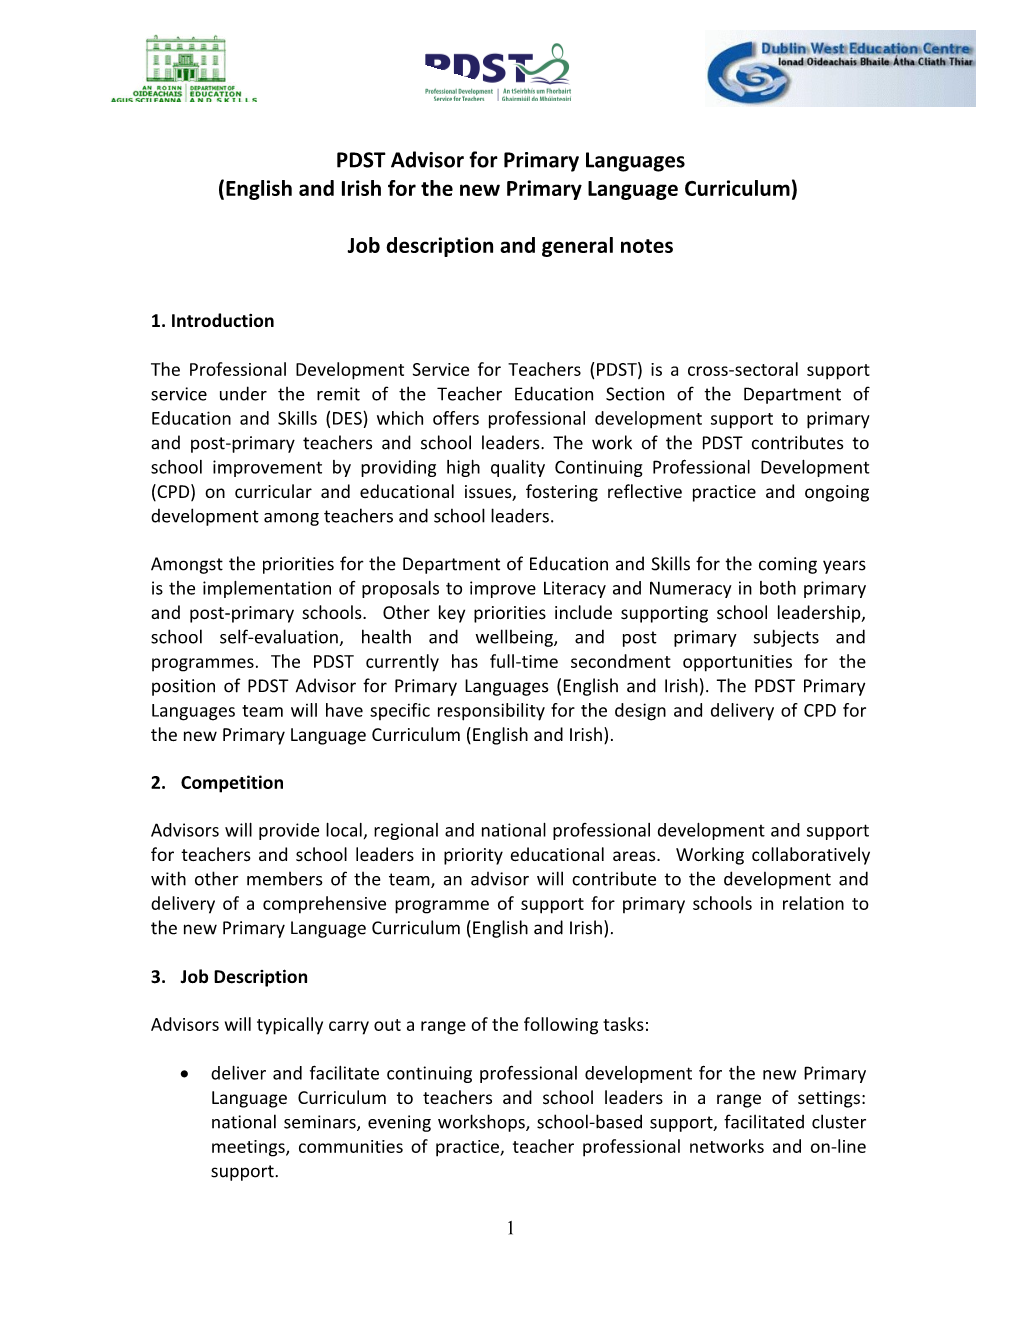 PDST Advisor for Primary Languages